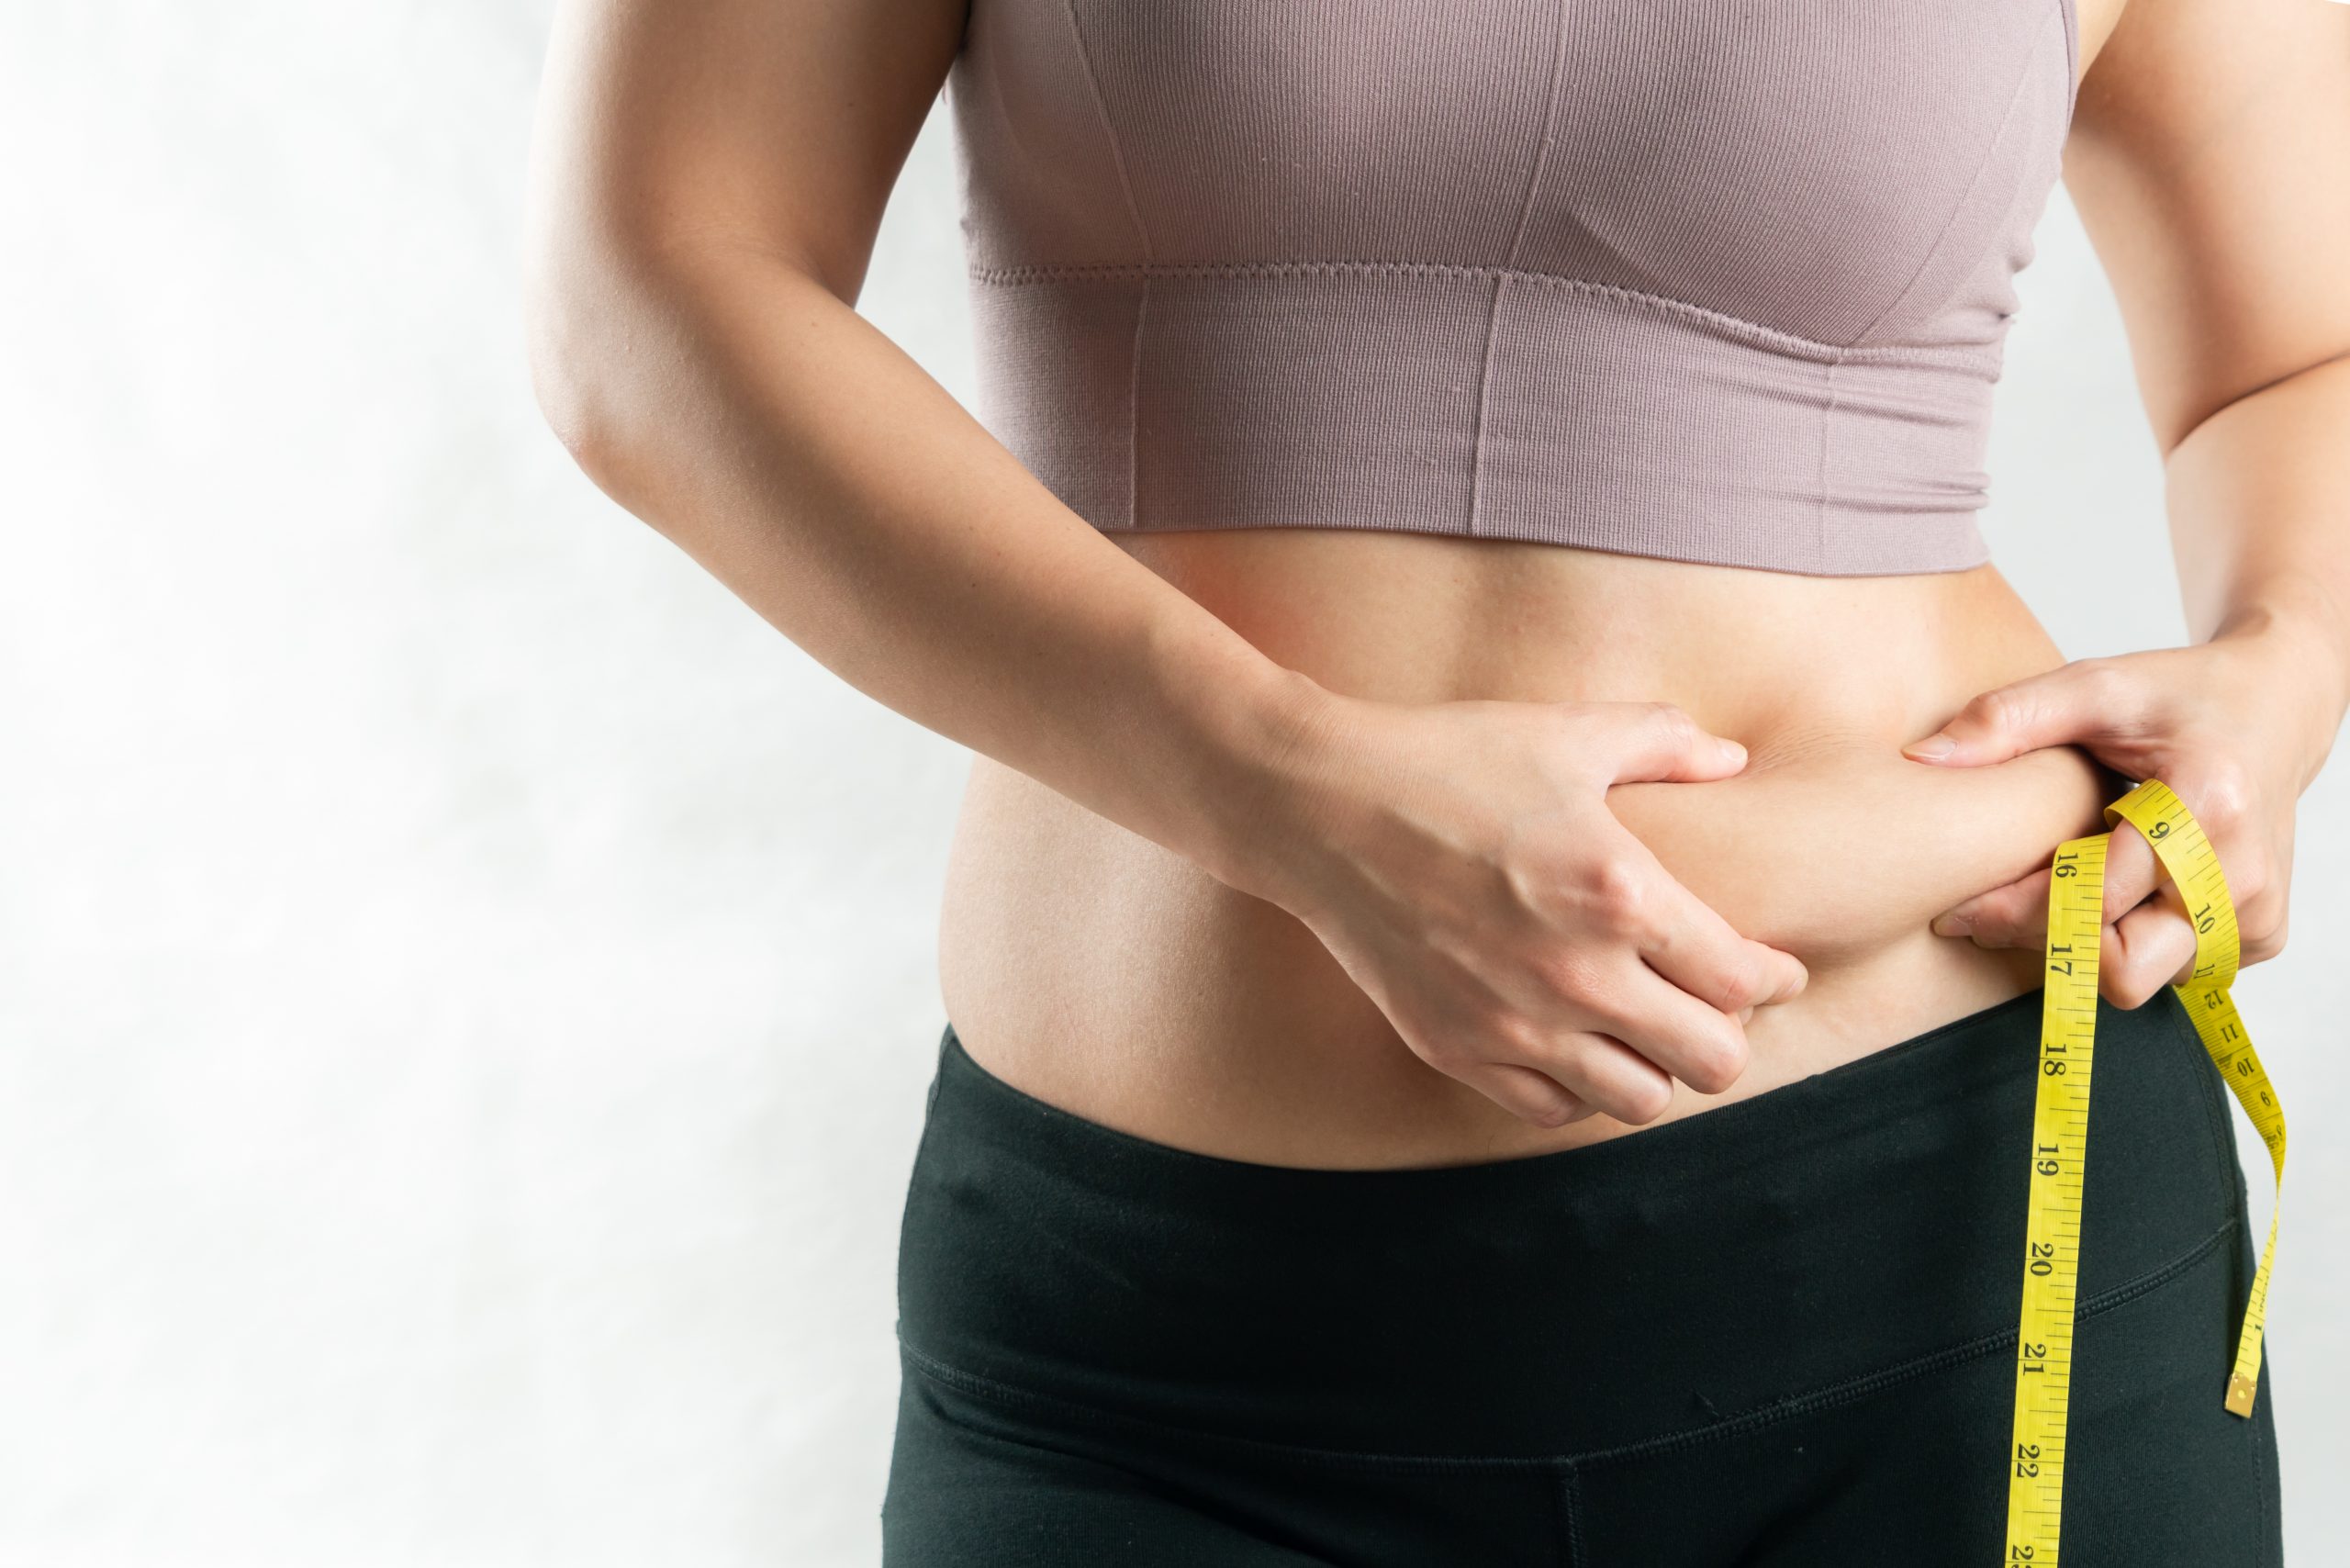 How Does Reduslim Help Against Belly Fat?